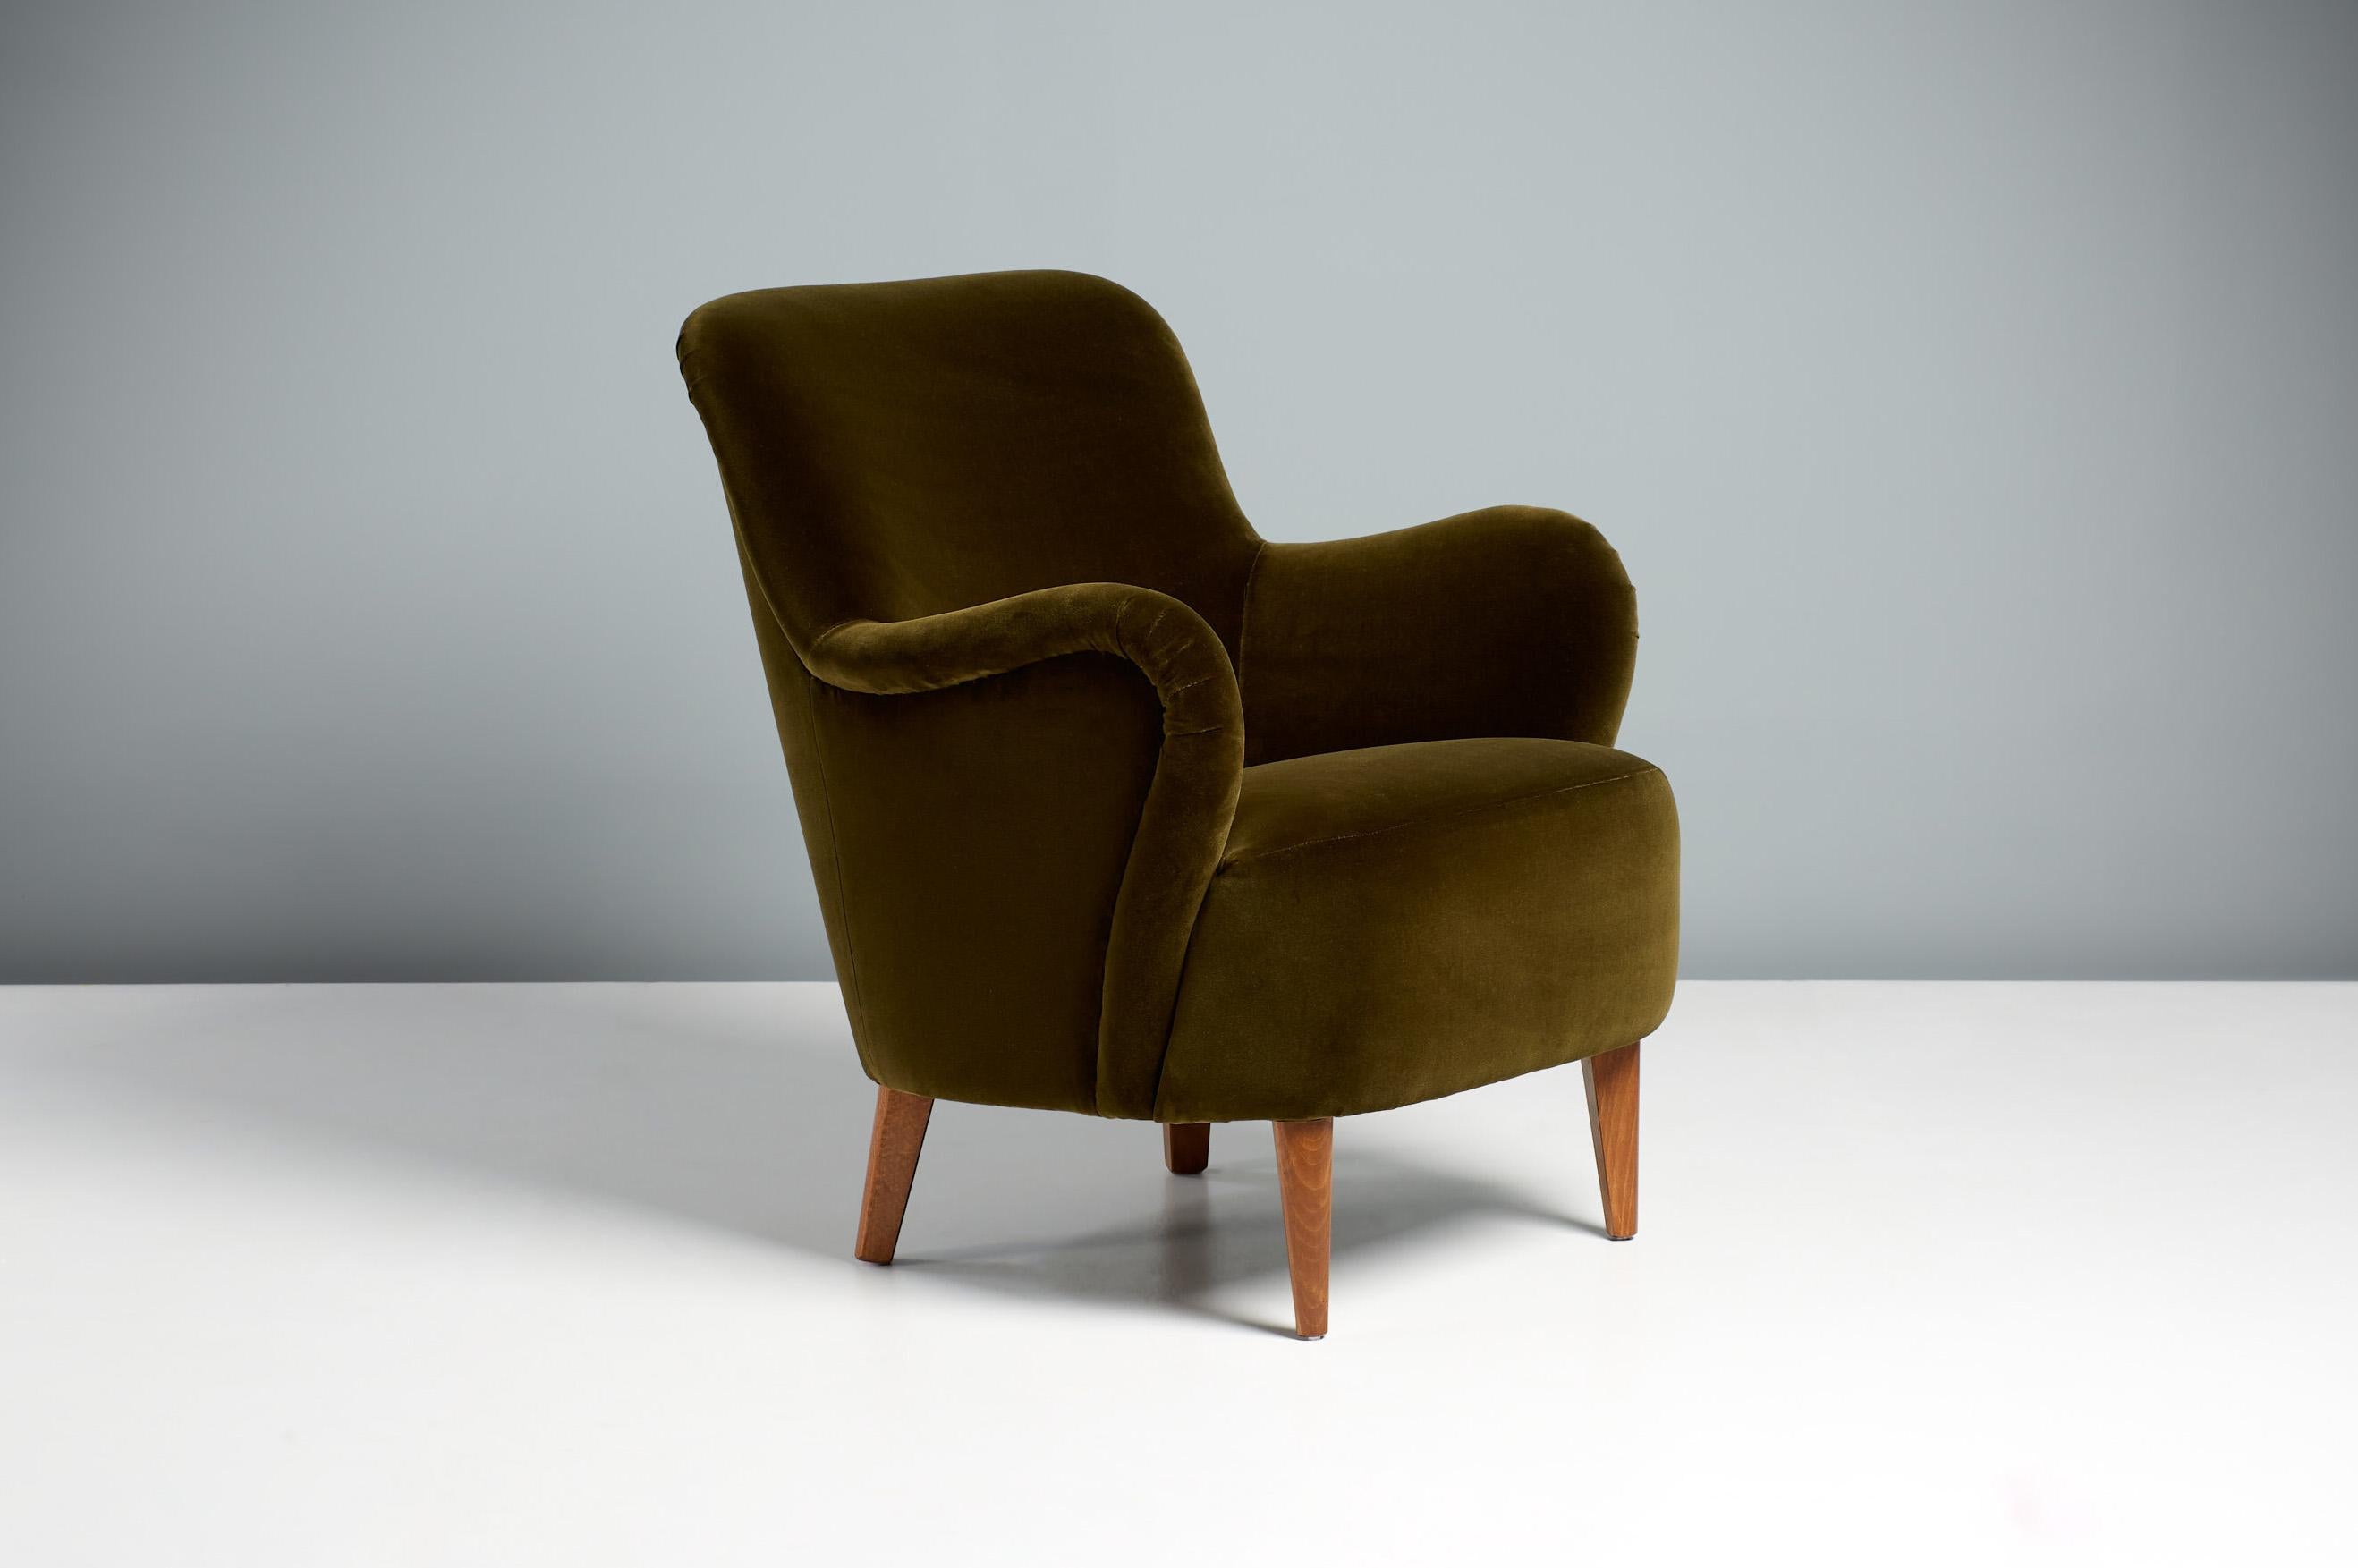 Dagmar - Albin Lounge Chair

A custom-made lounge chair developed and hand-made at our workshops in London using the highest quality materials. The Albin chair is available to order in a range of different fabrics with a choice of 3 legs finishes.